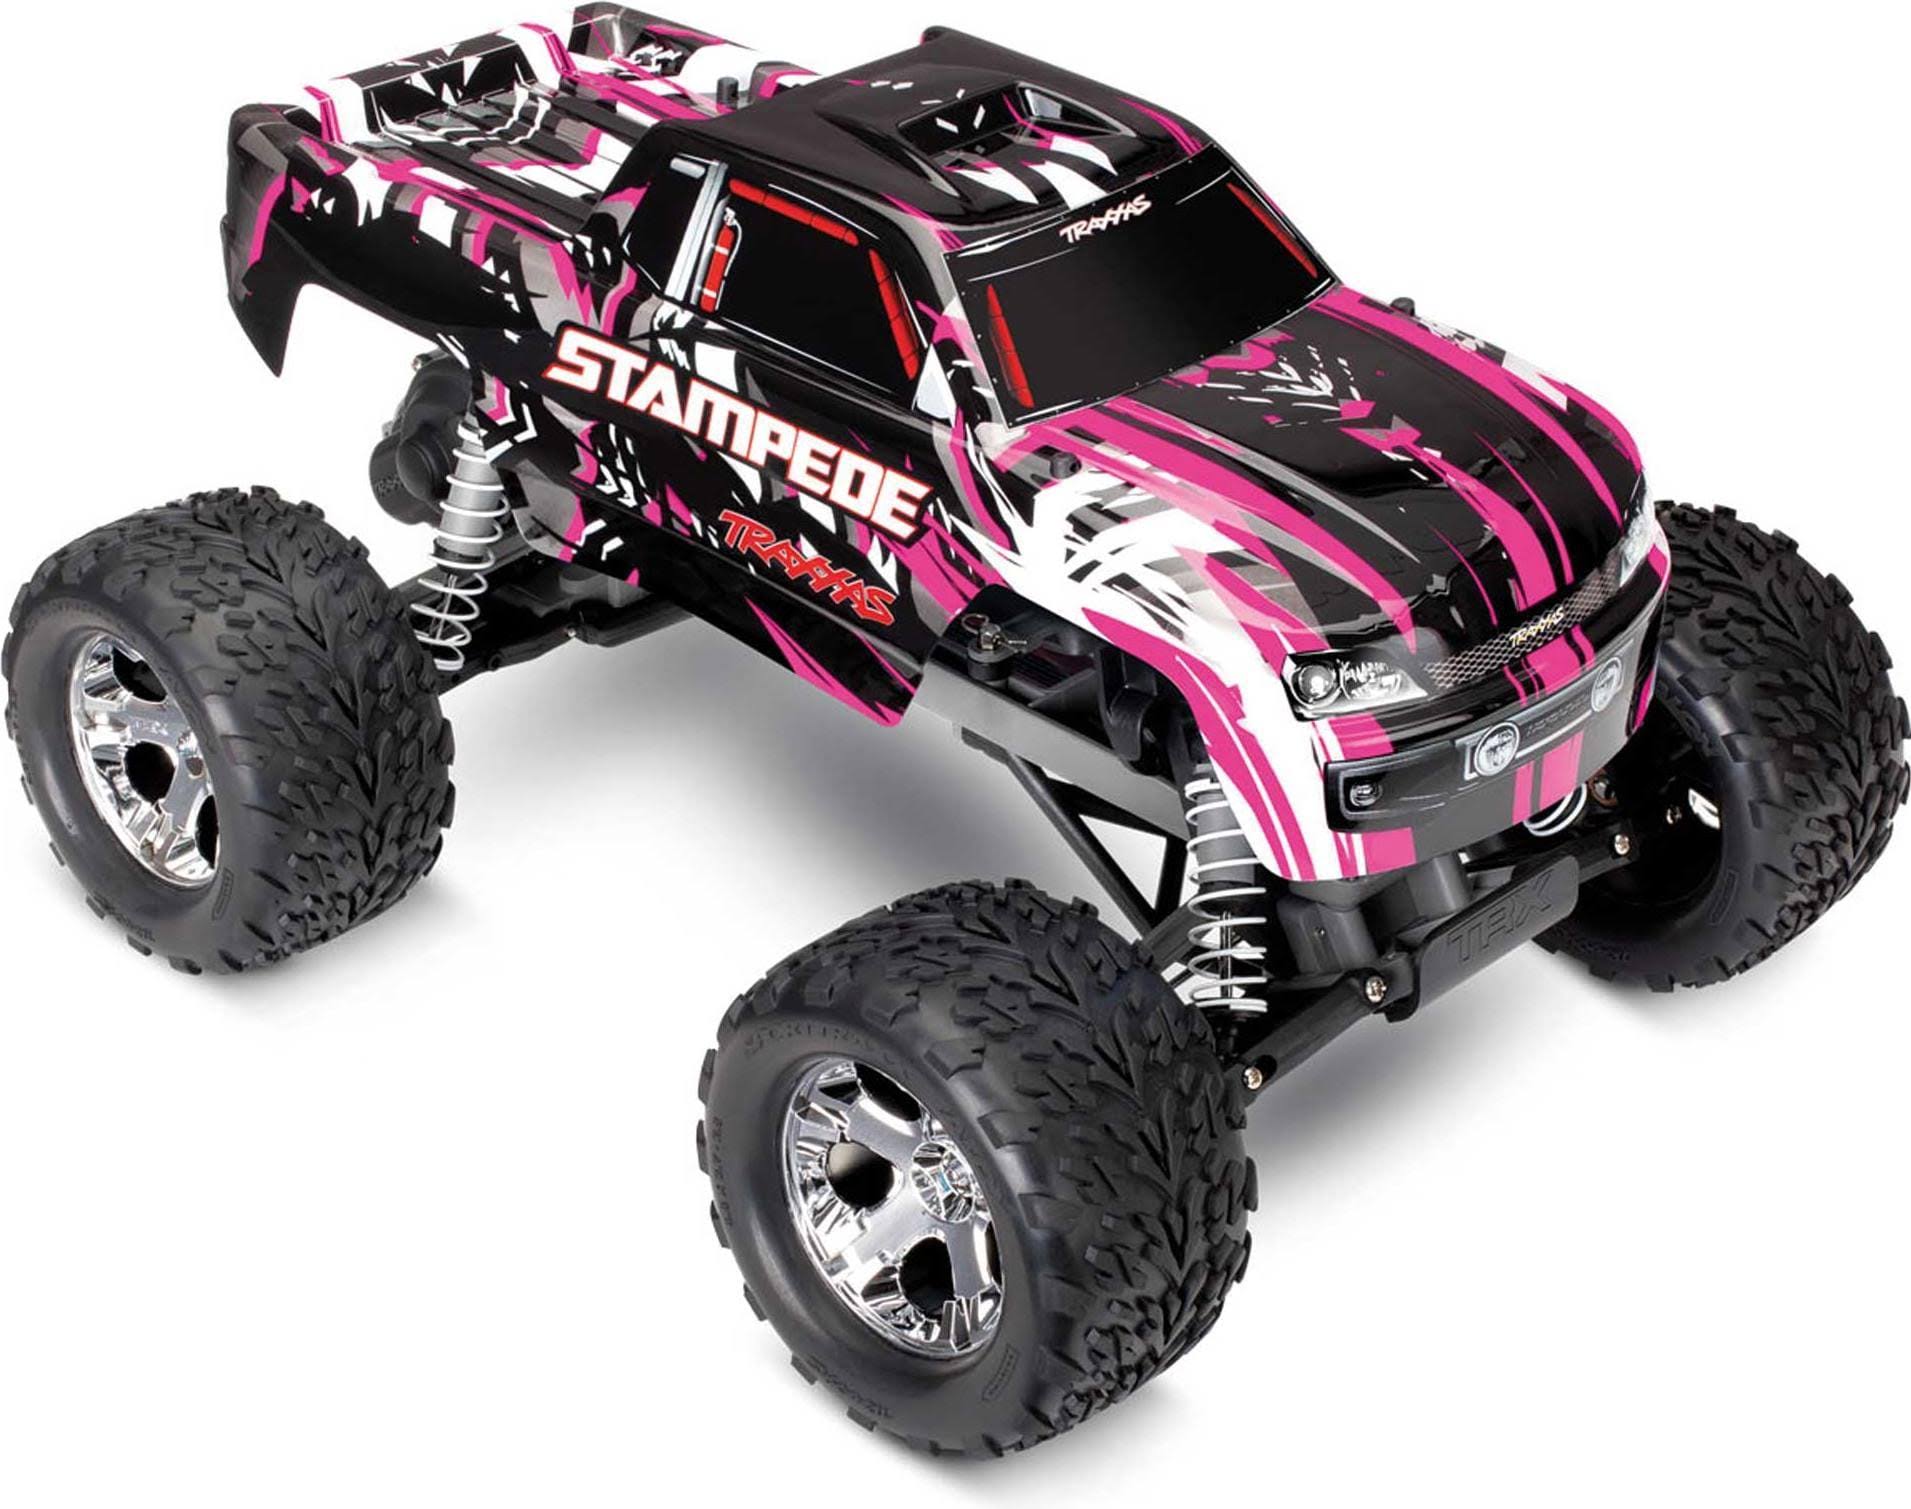 Traxxas 1/10 Stampede XL-5 2WD RTR Monster Truck - Pink